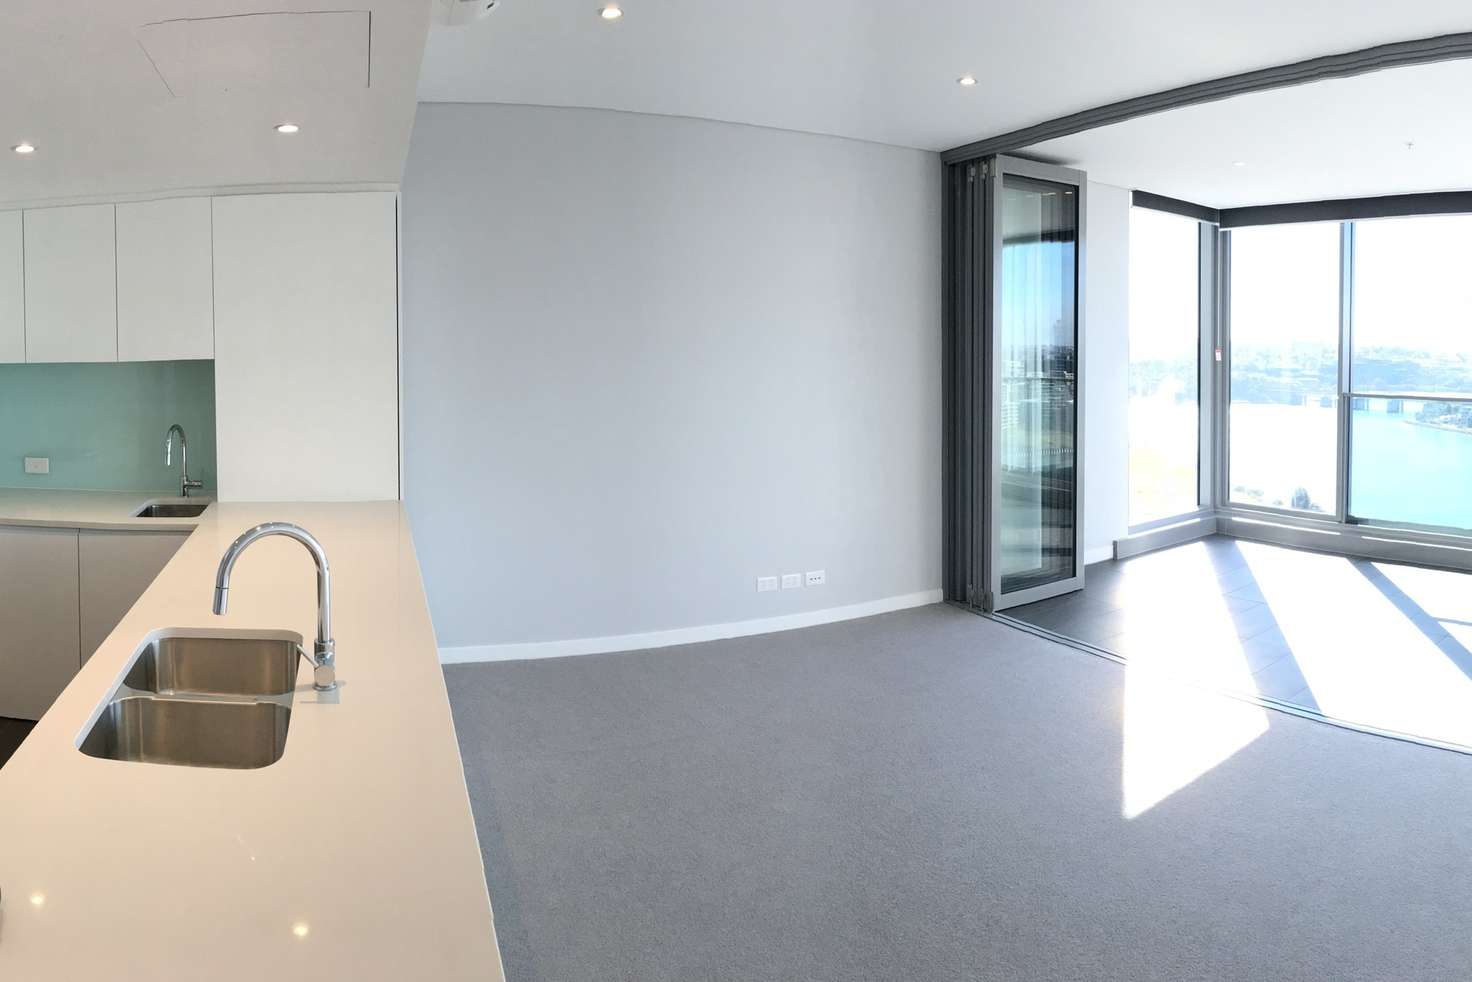 Main view of Homely apartment listing, 2208/18 Footbridge Boulevard, Wentworth Point NSW 2127